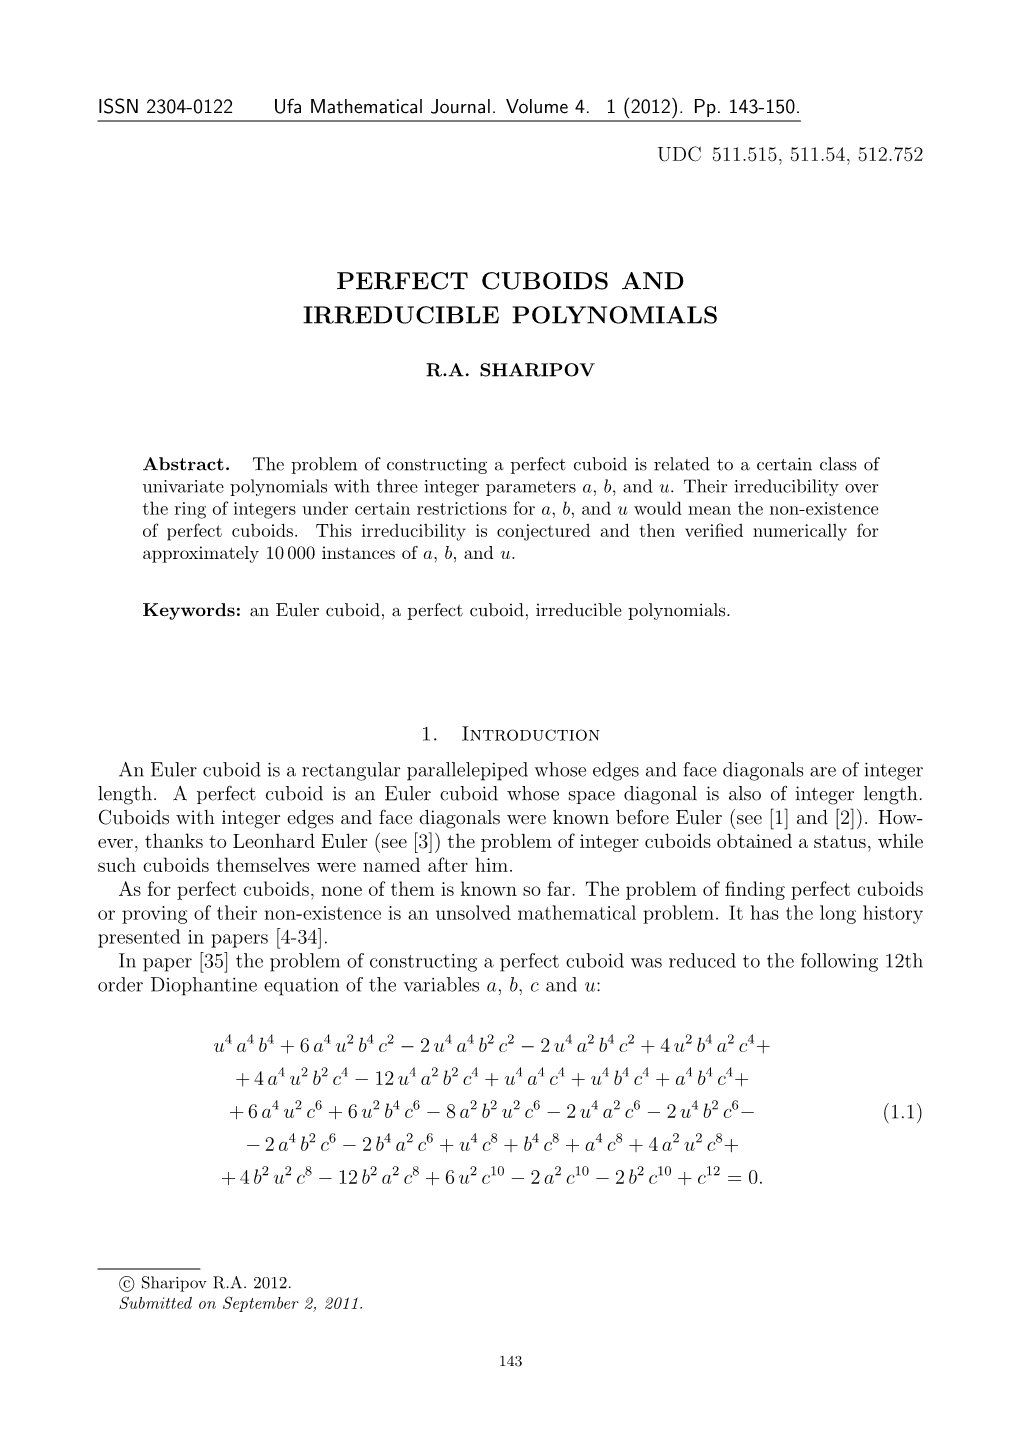 Perfect Cuboids and Irreducible Polynomials